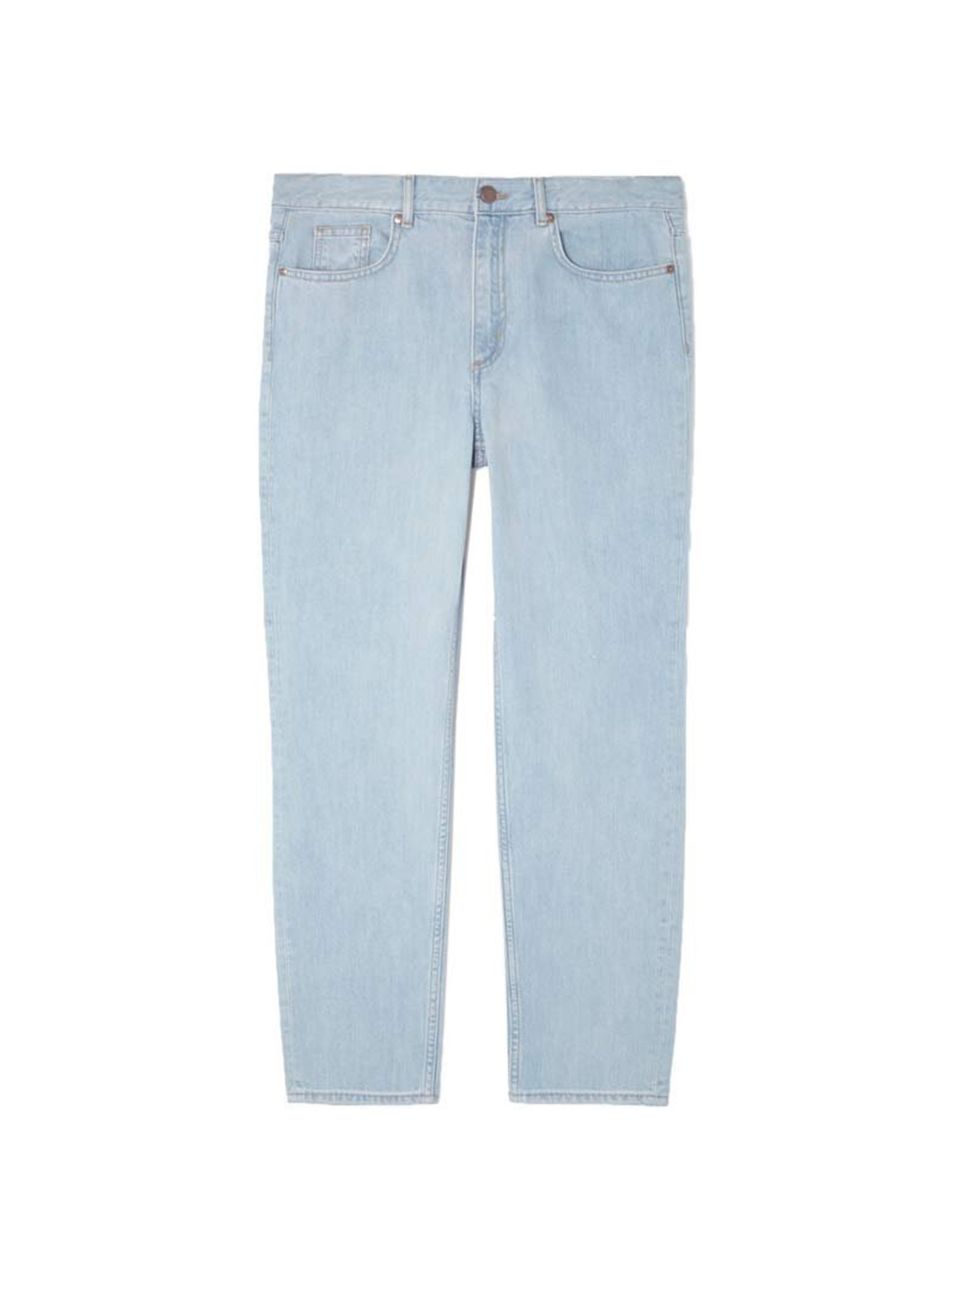 <p>Bright skies call for washed out denim. </p><p><a href="http://www.cosstores.com/gb/Shop/Women/New/Relaxed_jeans/365246-14621897.1">COS</a> jeans, £59</p>